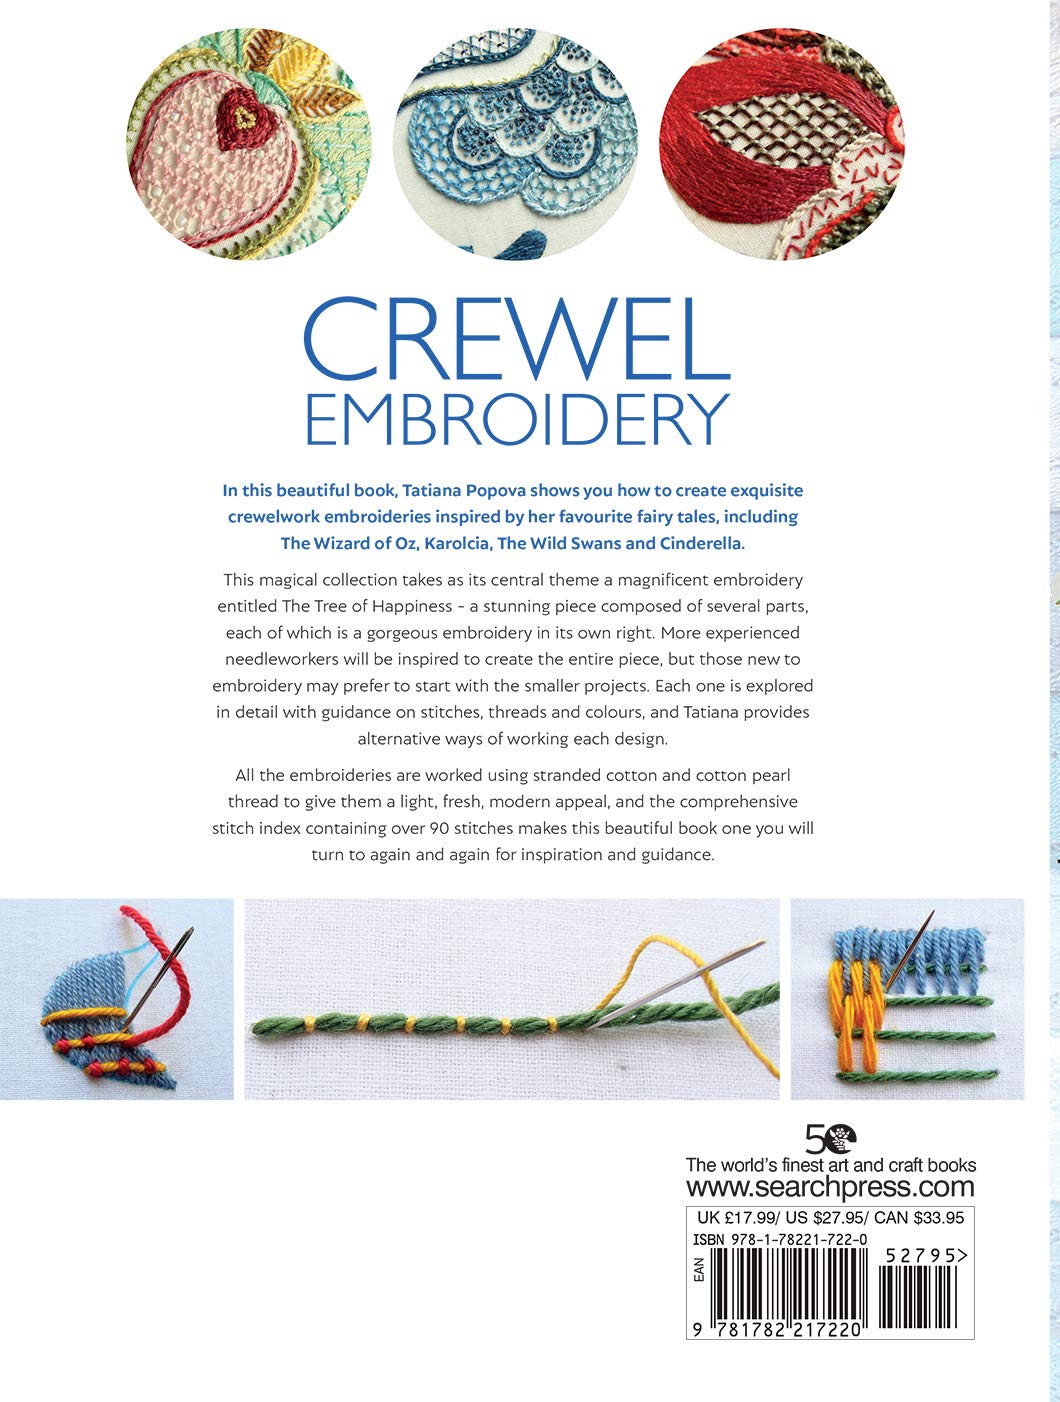 Crewel Embroidery book